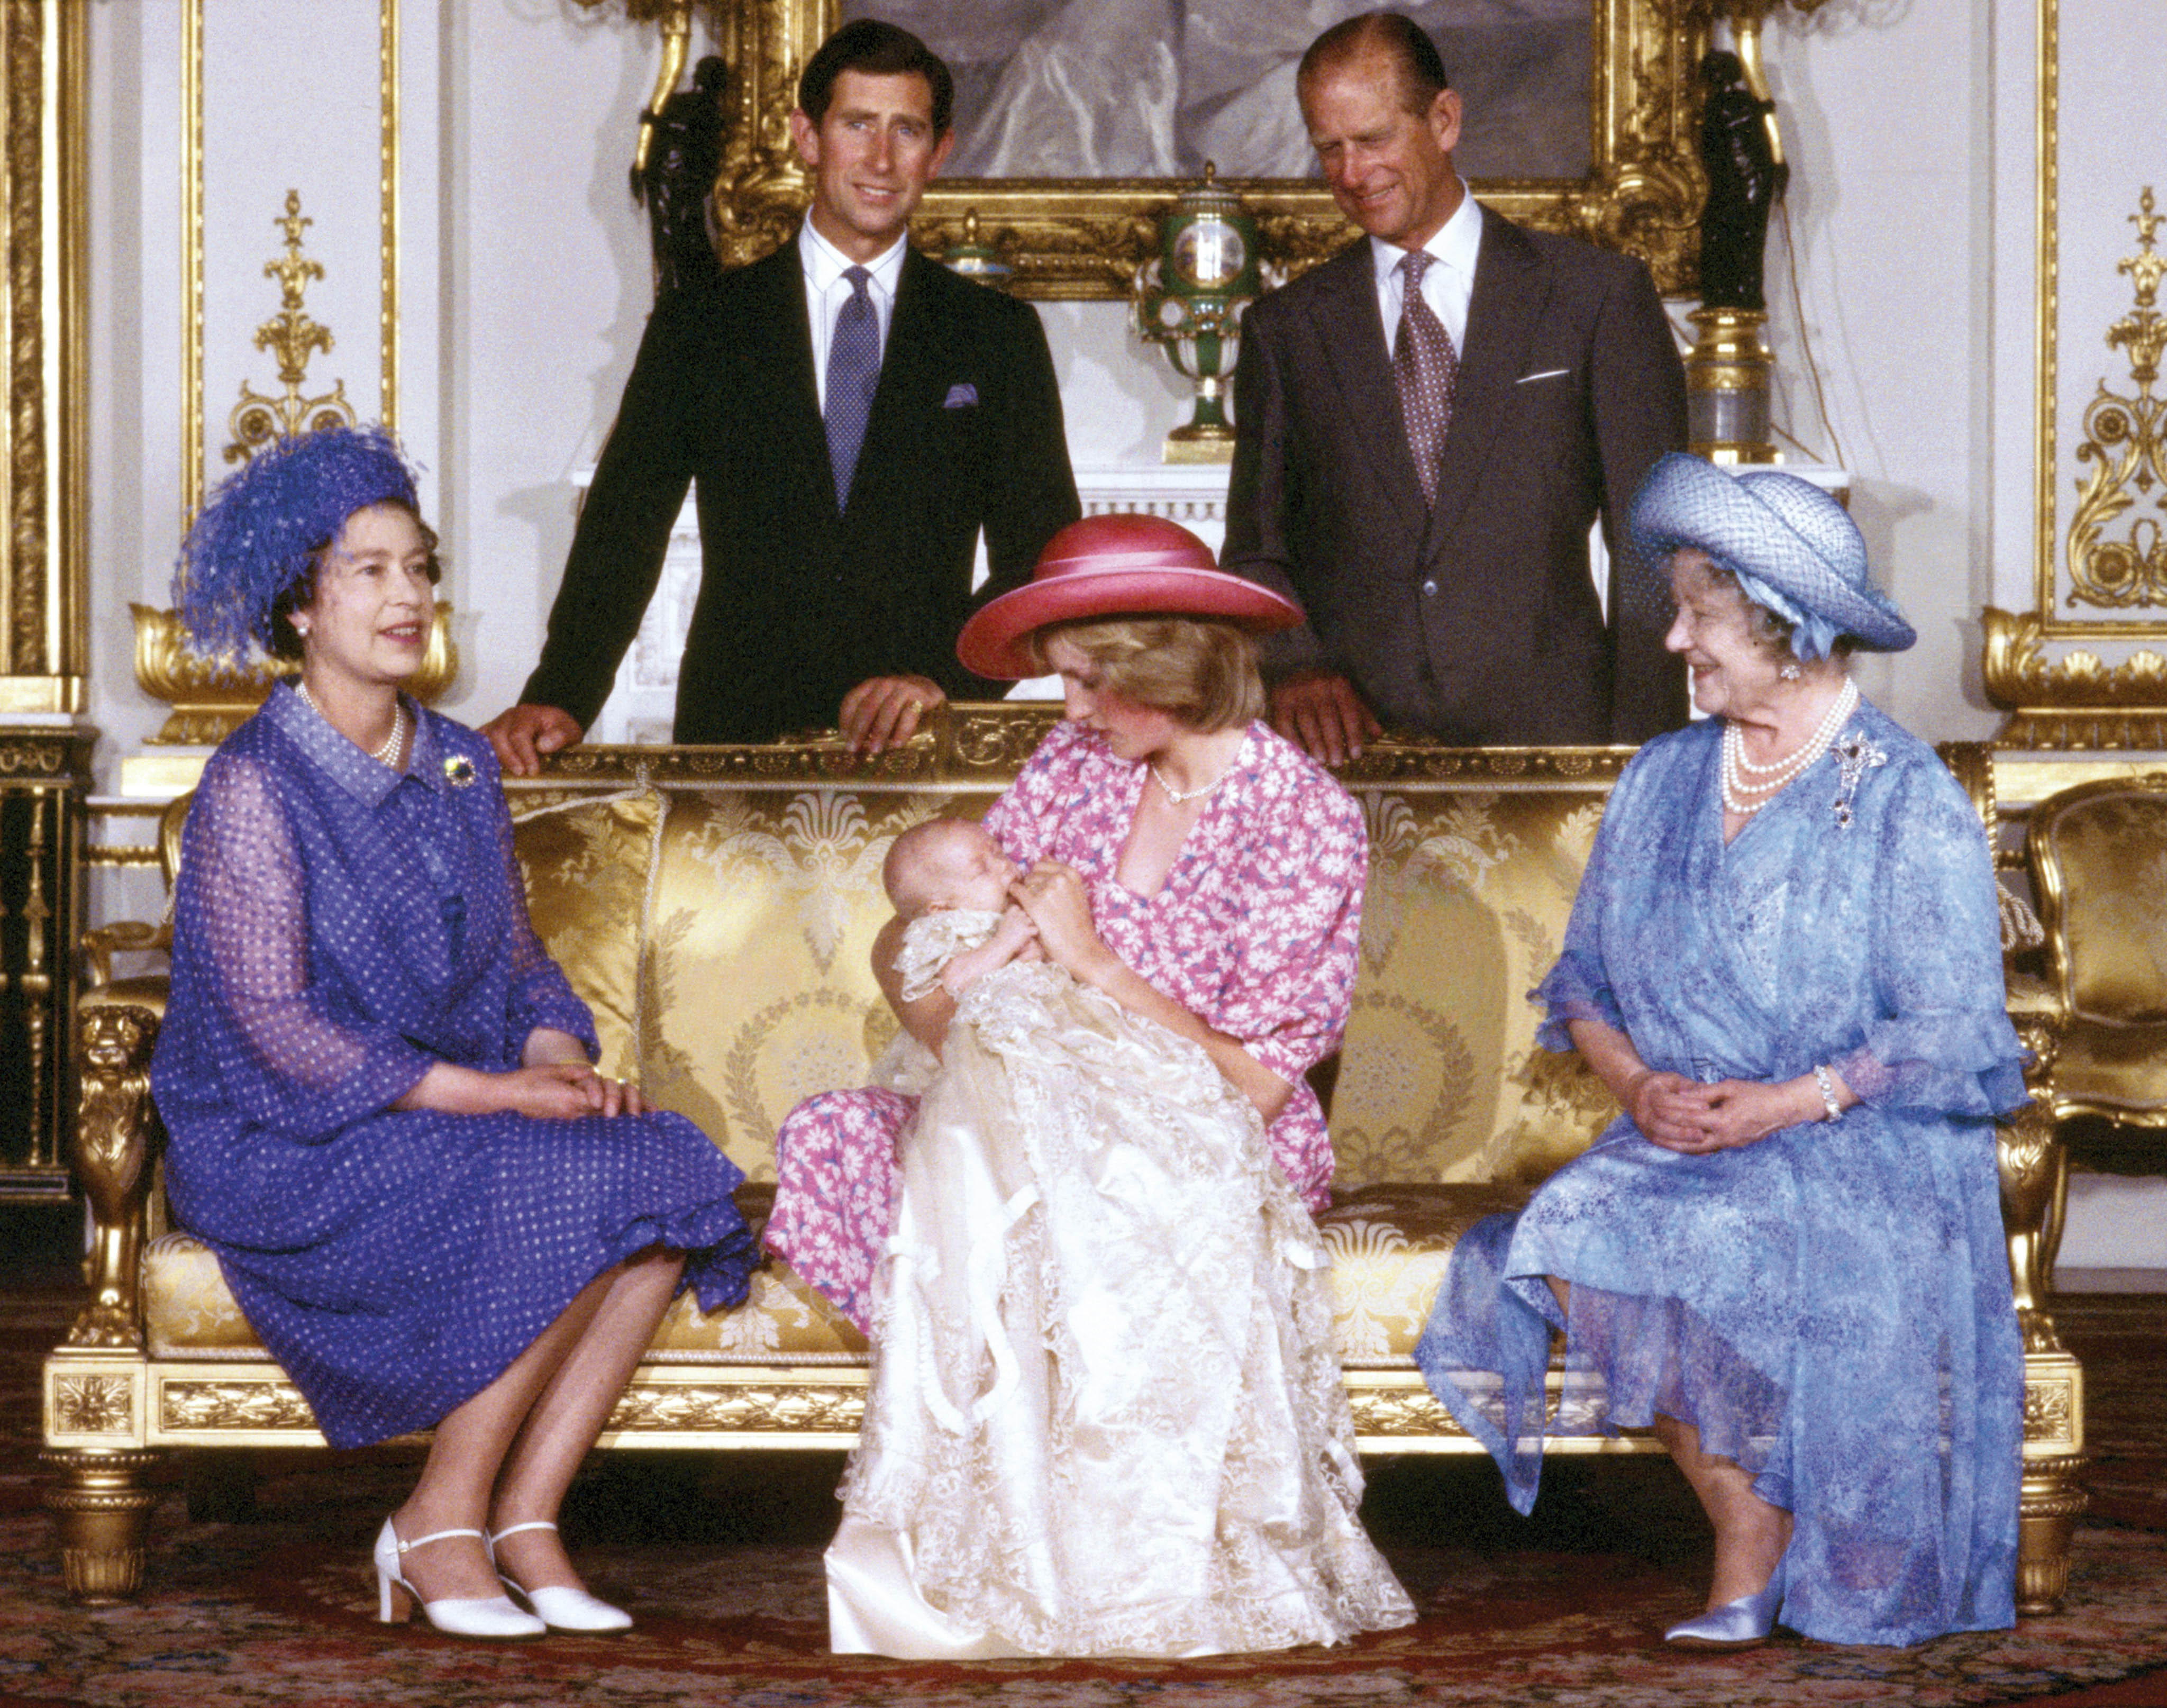 4 August 1982: The Royal family at Buckingham Palace, London, on the day of Prince William's christening. Standing (from left): the Prince of Wales and the Duke of Edinburgh; seated (from left): Queen Elizabeth II, the Princess of Wales holding Prince William, and the Queen Mother